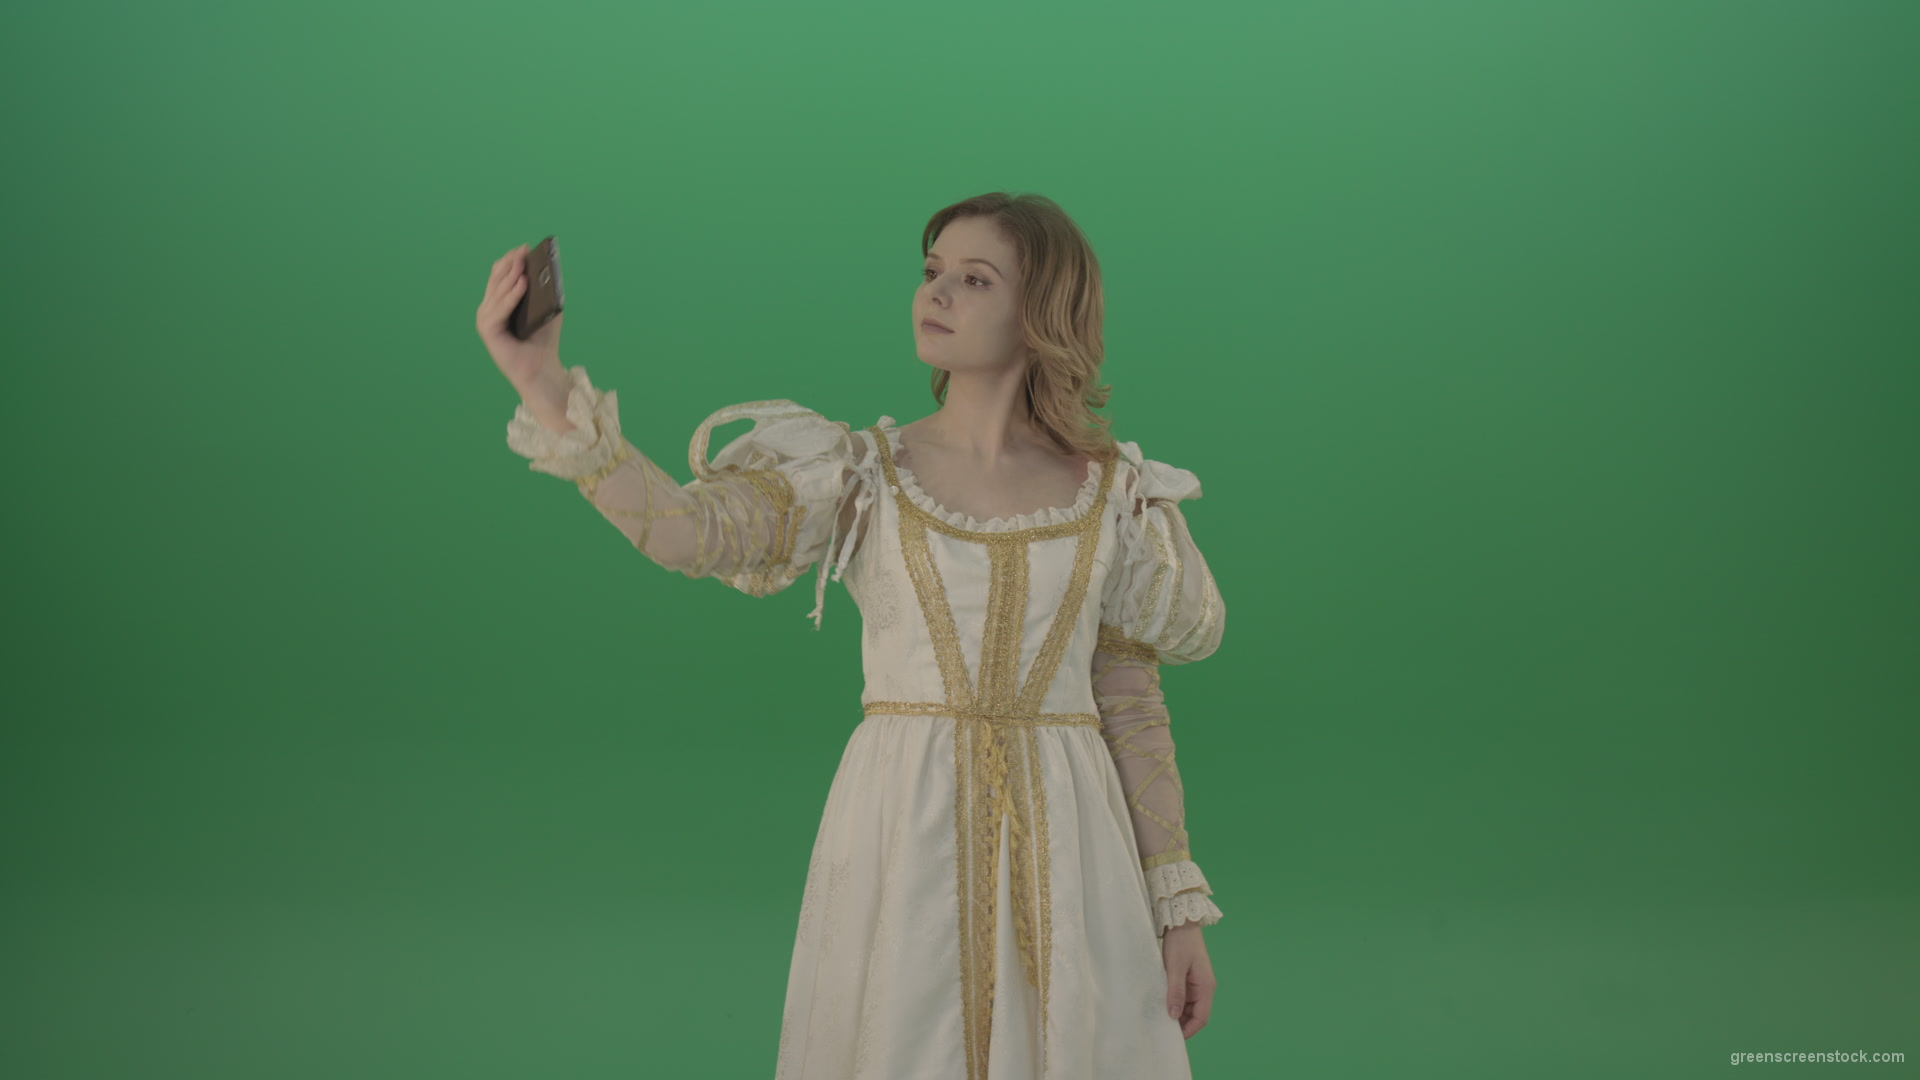 Princess-girl-dressed-in-a-light-suit-makes-a-sephi-on-a-modern-phone-isolated-on-chromakey-background_002 Green Screen Stock